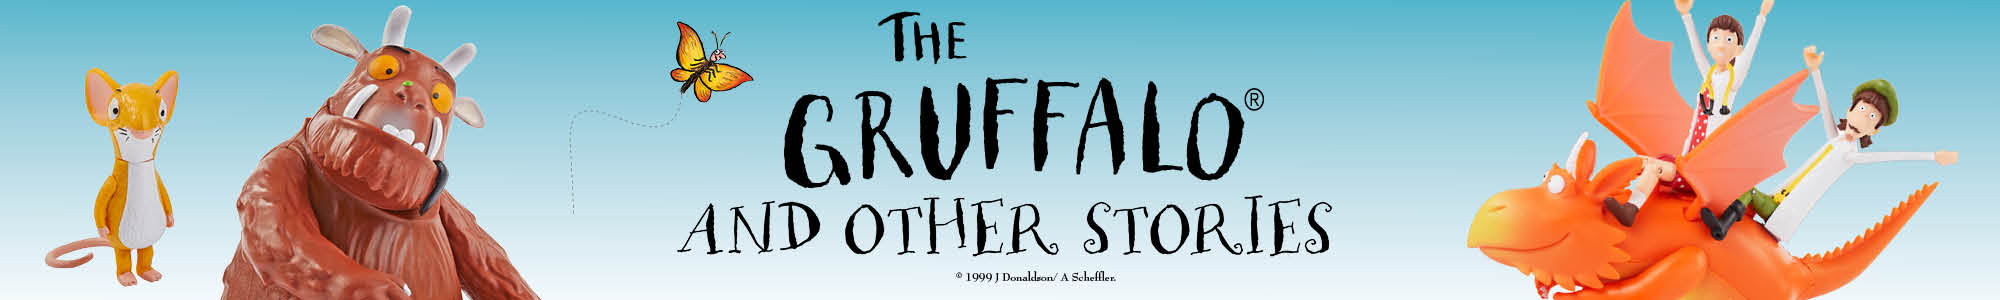 Entertainer_banner_Gruffalo_and_other_stories.jpg